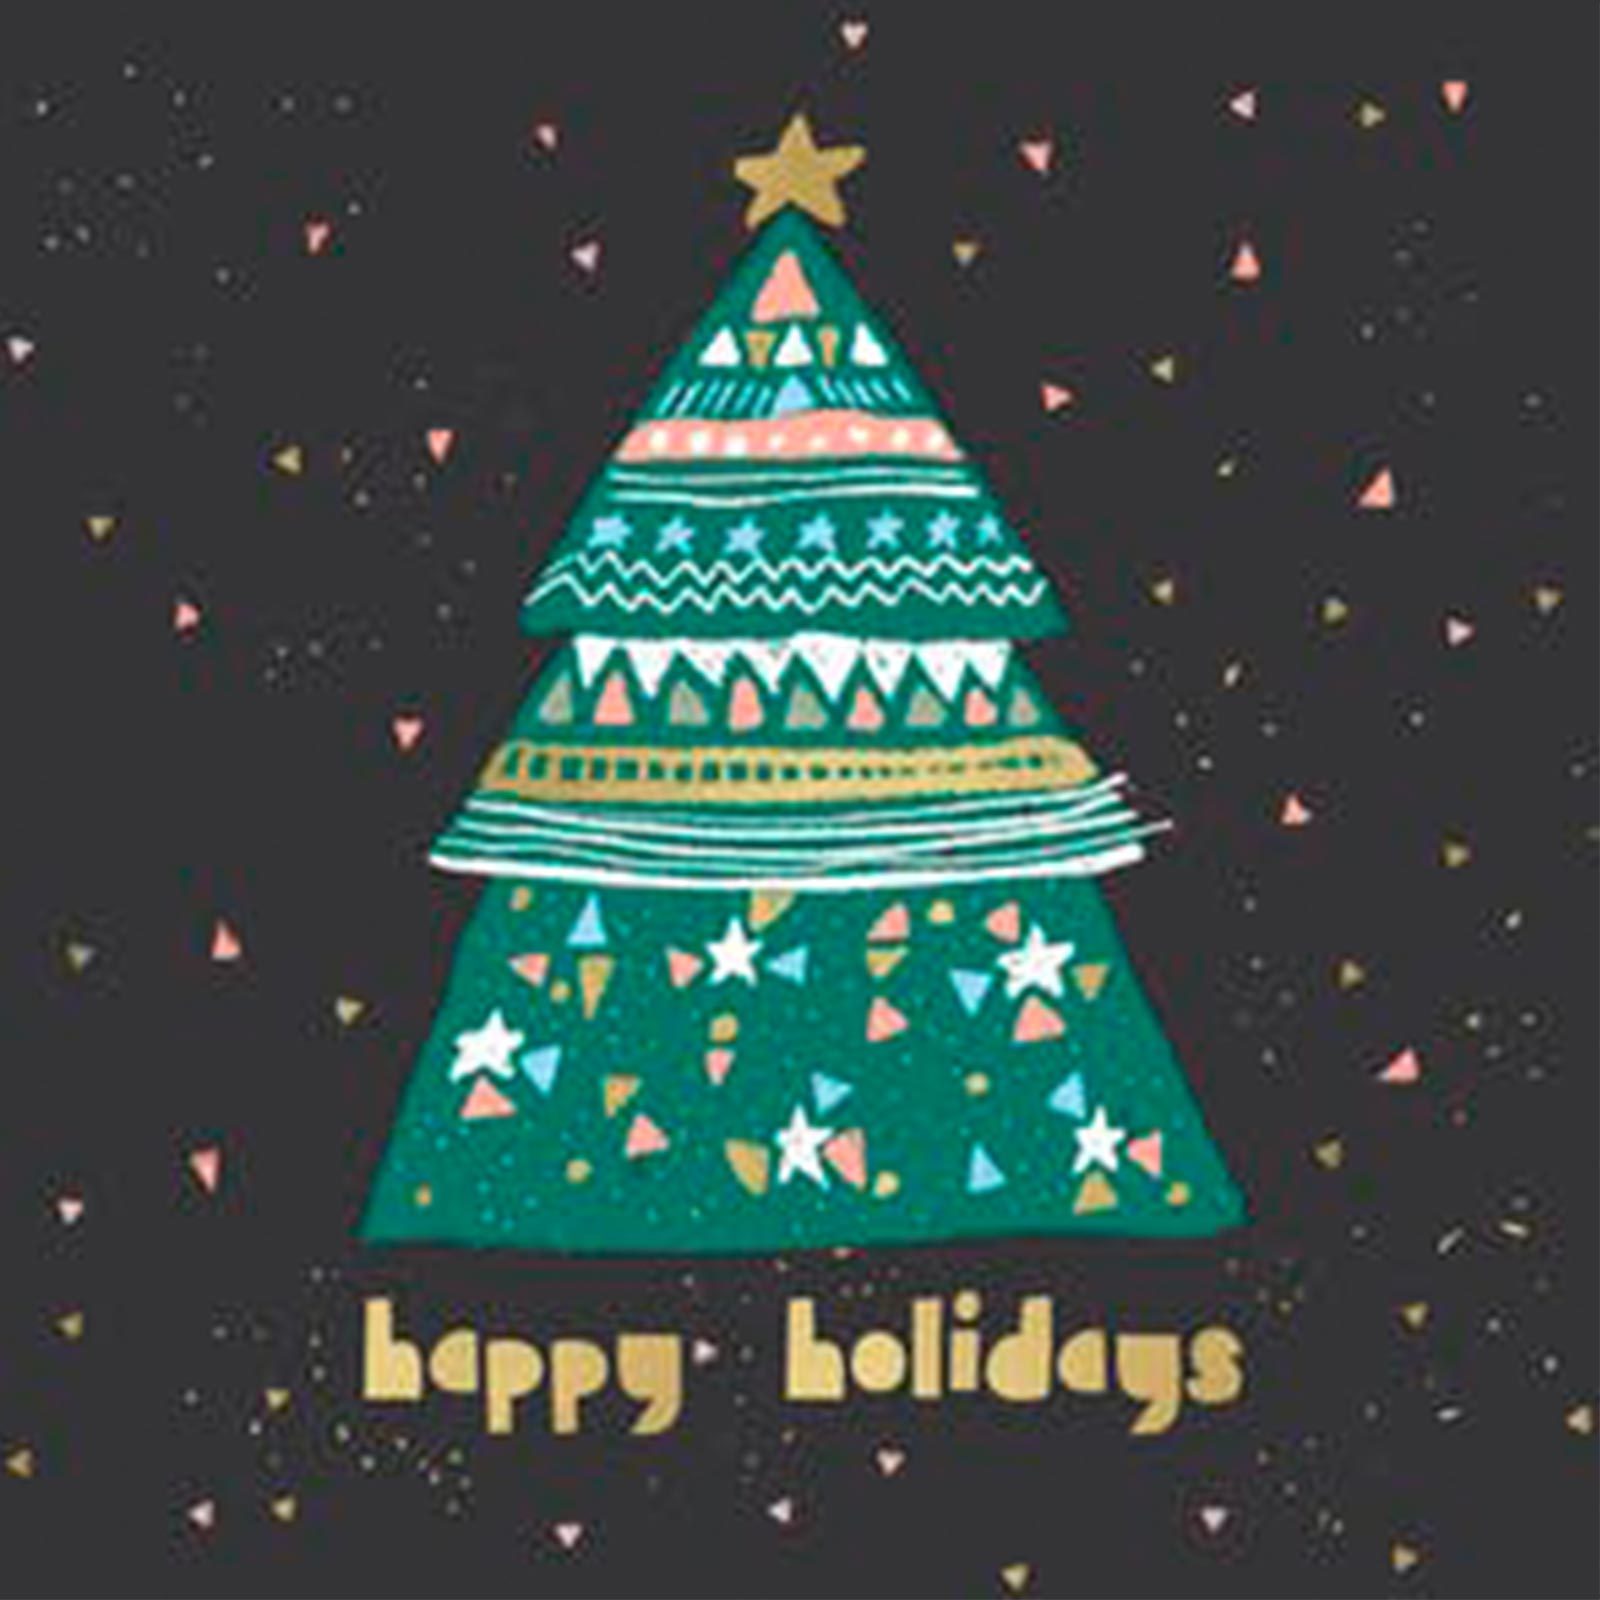 Free Christmas Cards To Print Out And Send This Year Reader S Digest